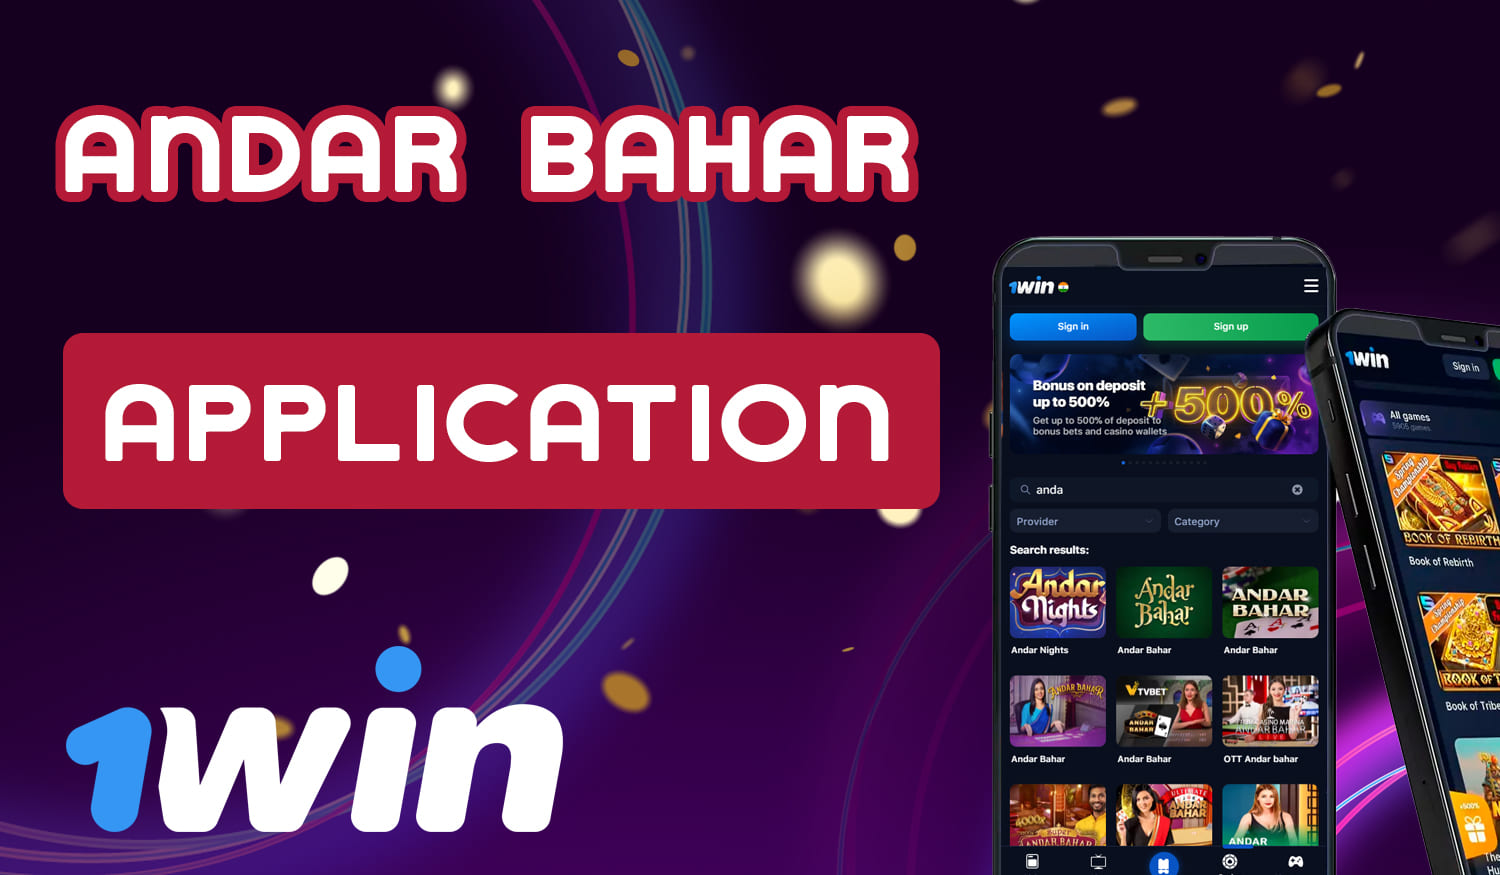 Download instructions for the 1win mobile app to play Andar Bahar